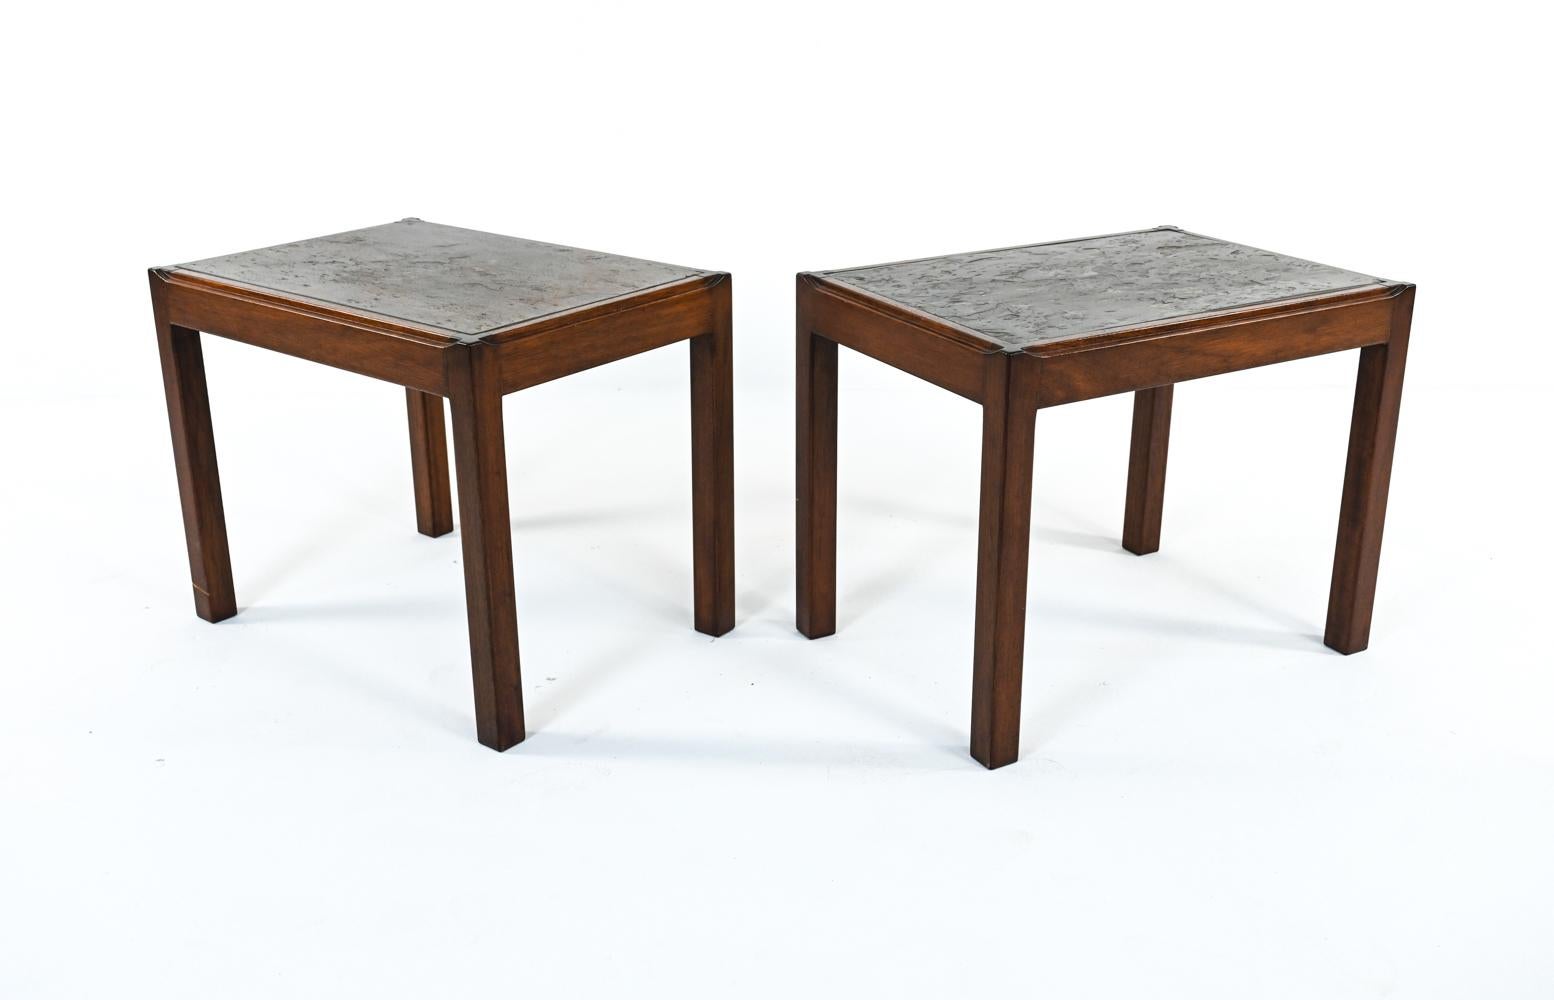 A fabulous pair of Scandinavian modern end or side tables in warm stained mahogany with an unusual inset slate tops, with texture and rich tones of bronze, gray, and umber. A transitional Brutalist design, c. 1970's, designed by Danish architect